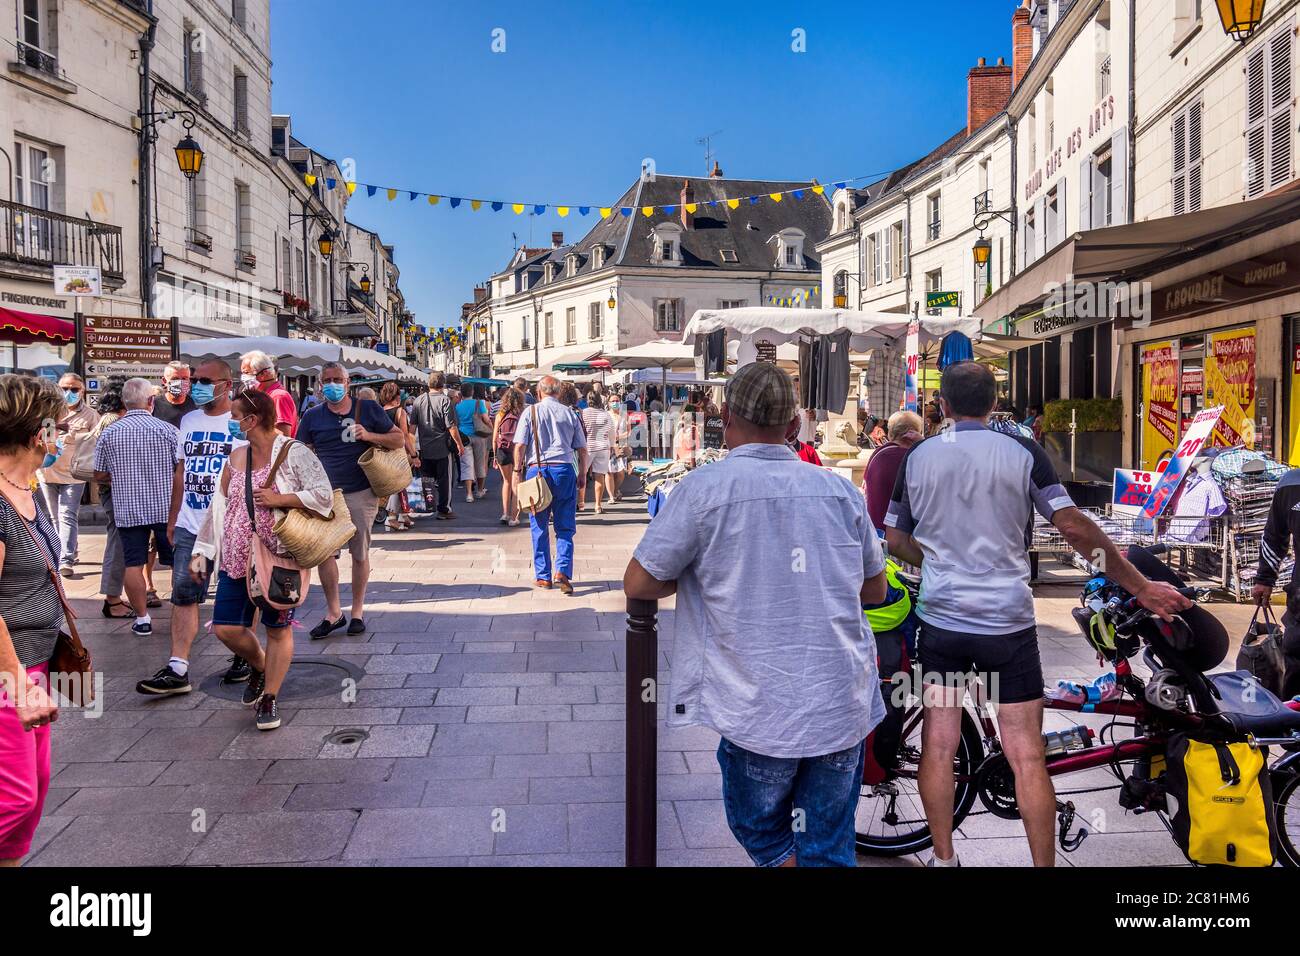 Crowded market square on market day with many people wearing face-masks - Loches, Indre-et-Loire, France. Stock Photo